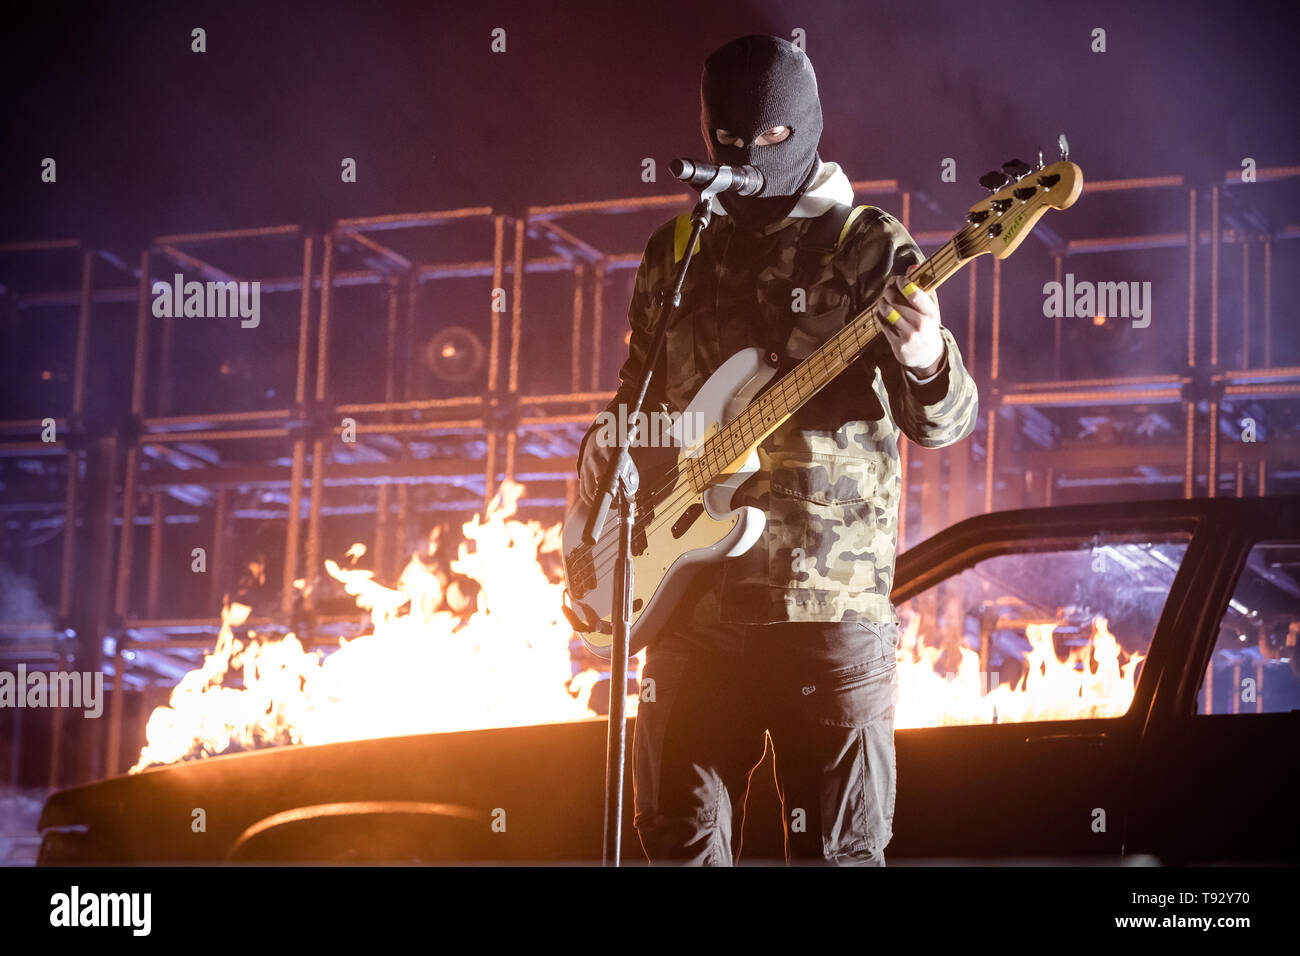 Singer Tyler Joseph of American music duo Twenty One Pilots during their "Bandito Tour" performing at Rogers Arena in Vancouver, BC on May 12th 2019 Stock Photo